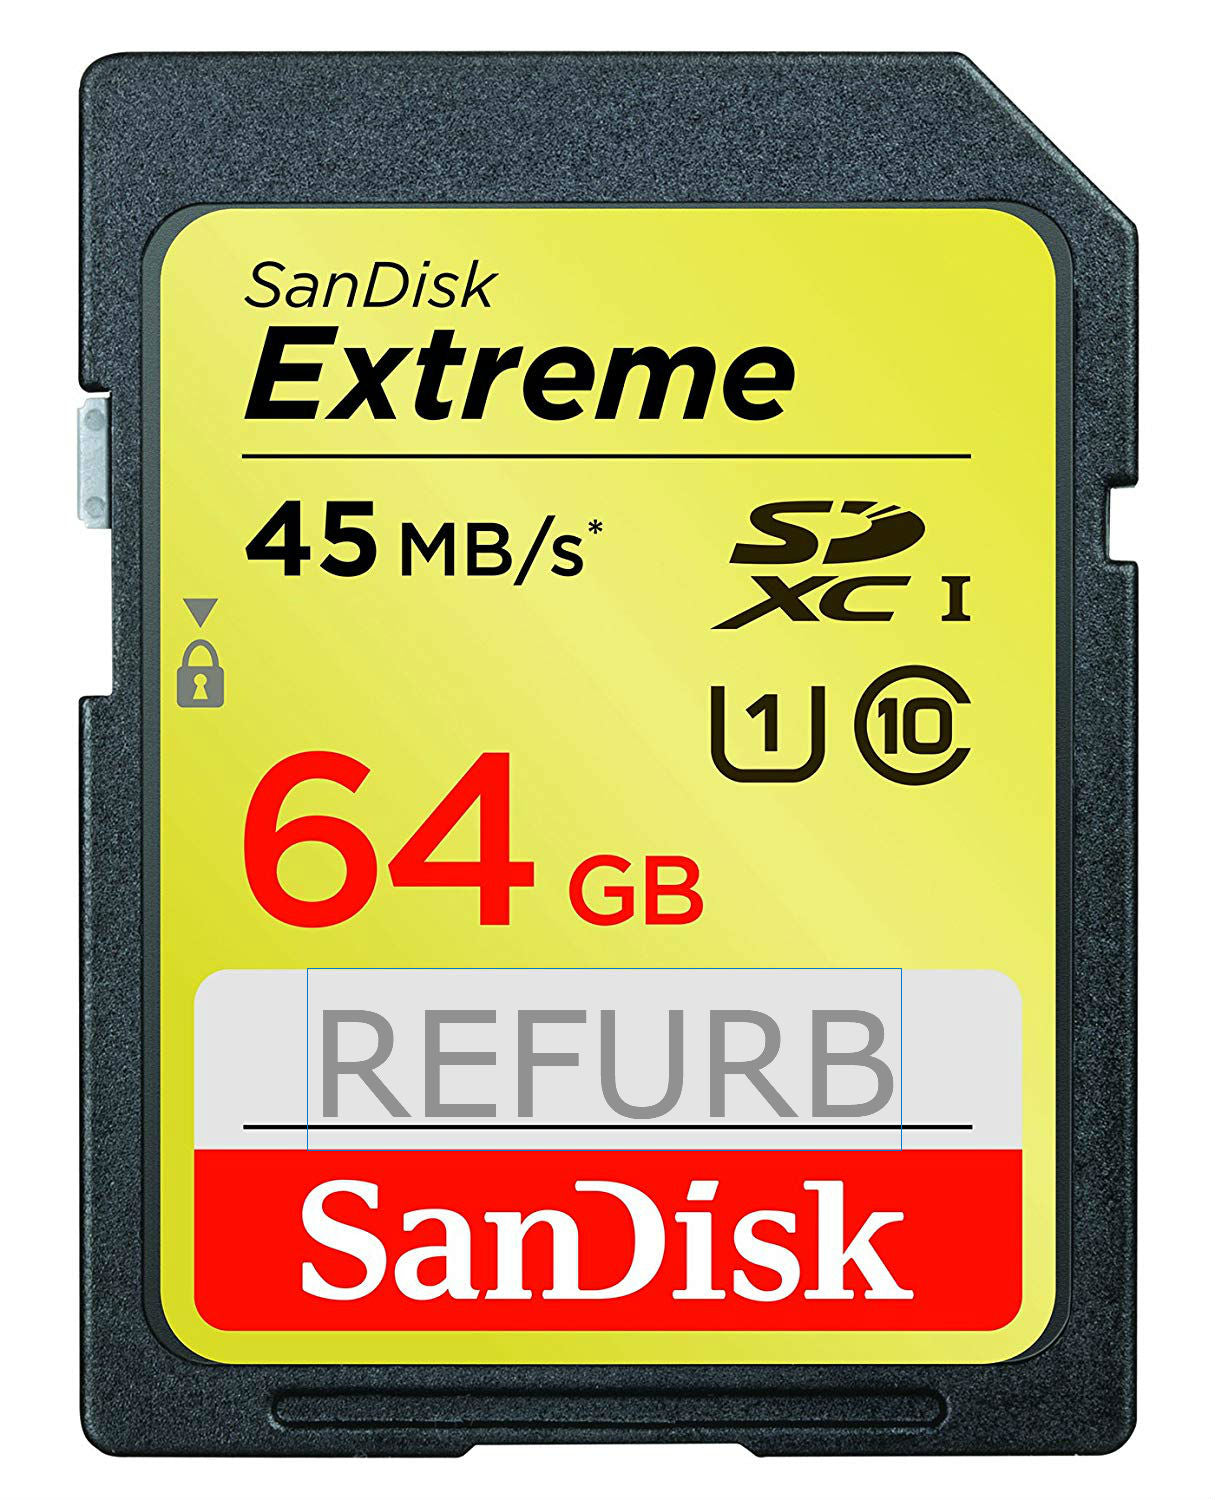 SanDisk Extreme 64GB SDXC UHS-1 Class 10 45MB/s Memory Card SDSDX-064G-X46 (Certified Refurbished)